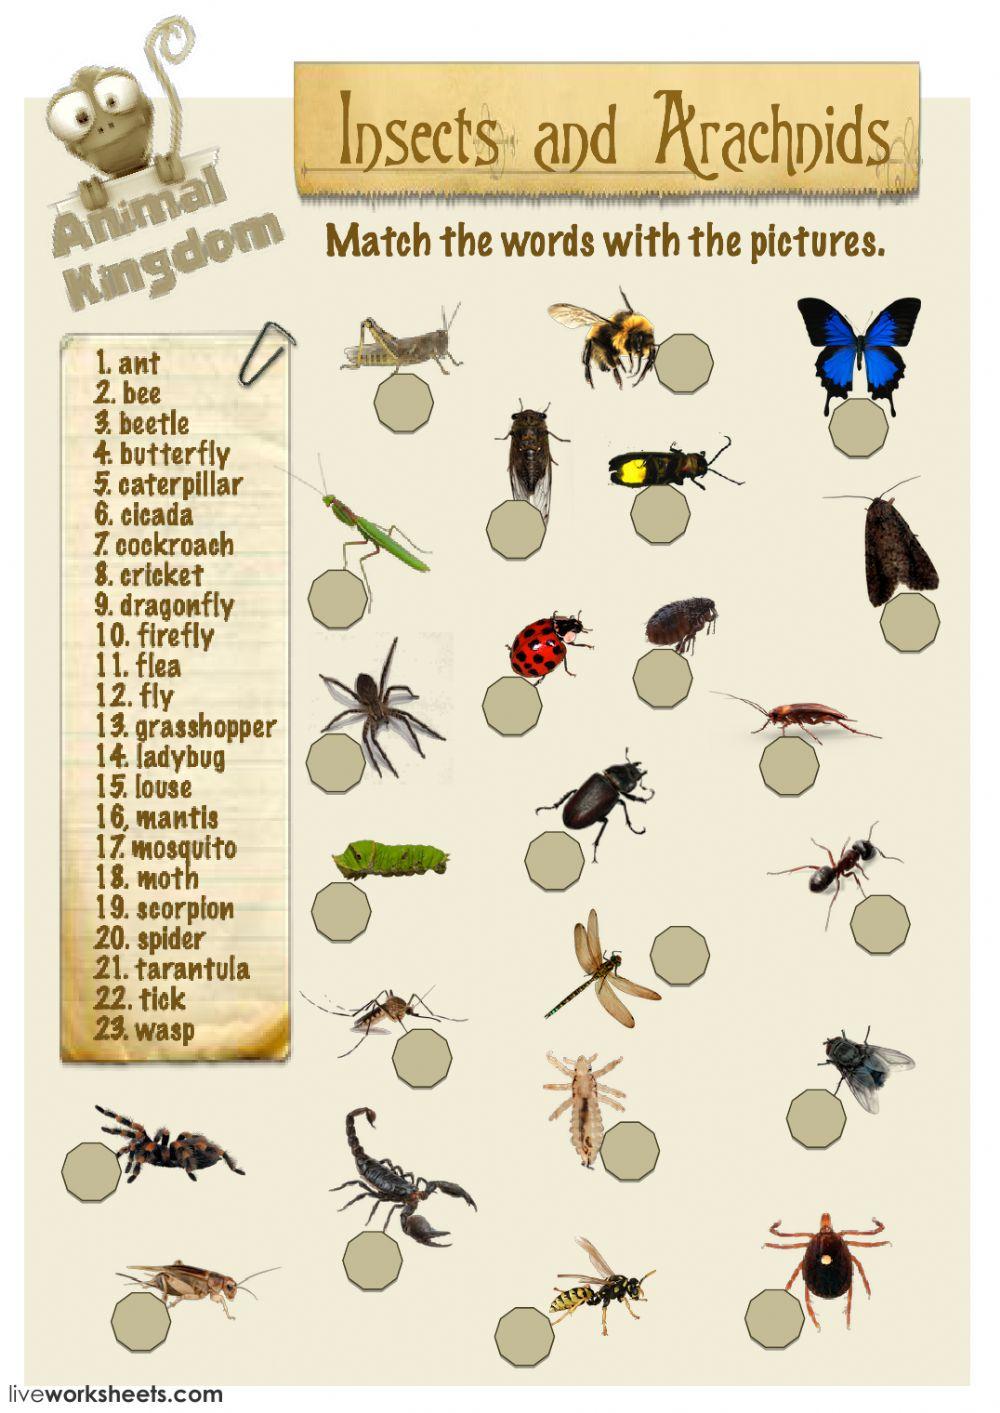 Animal Kingdom - Insects